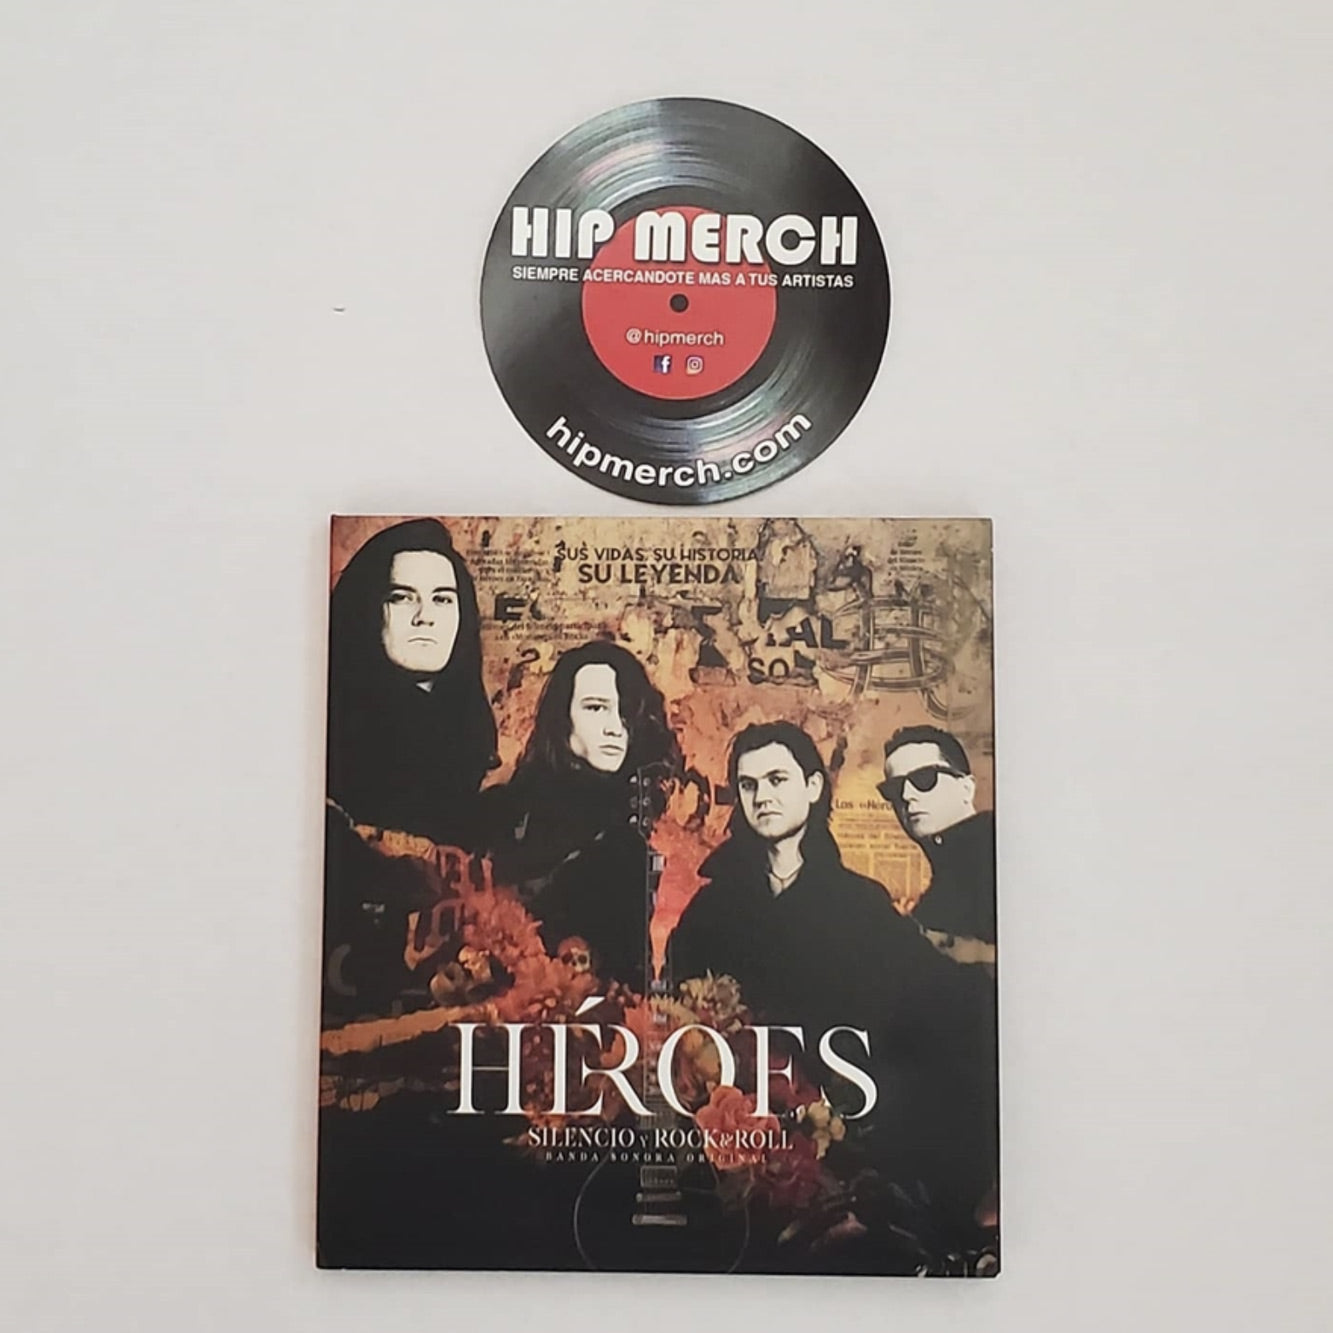  Heroes: Silencio Y Rock & Roll - Special Edition Box - 2LP  Picture Disc + 2CD + PAL Format DVD, All-region Blu-ray, Libreto & Poster:  CDs & Vinyl